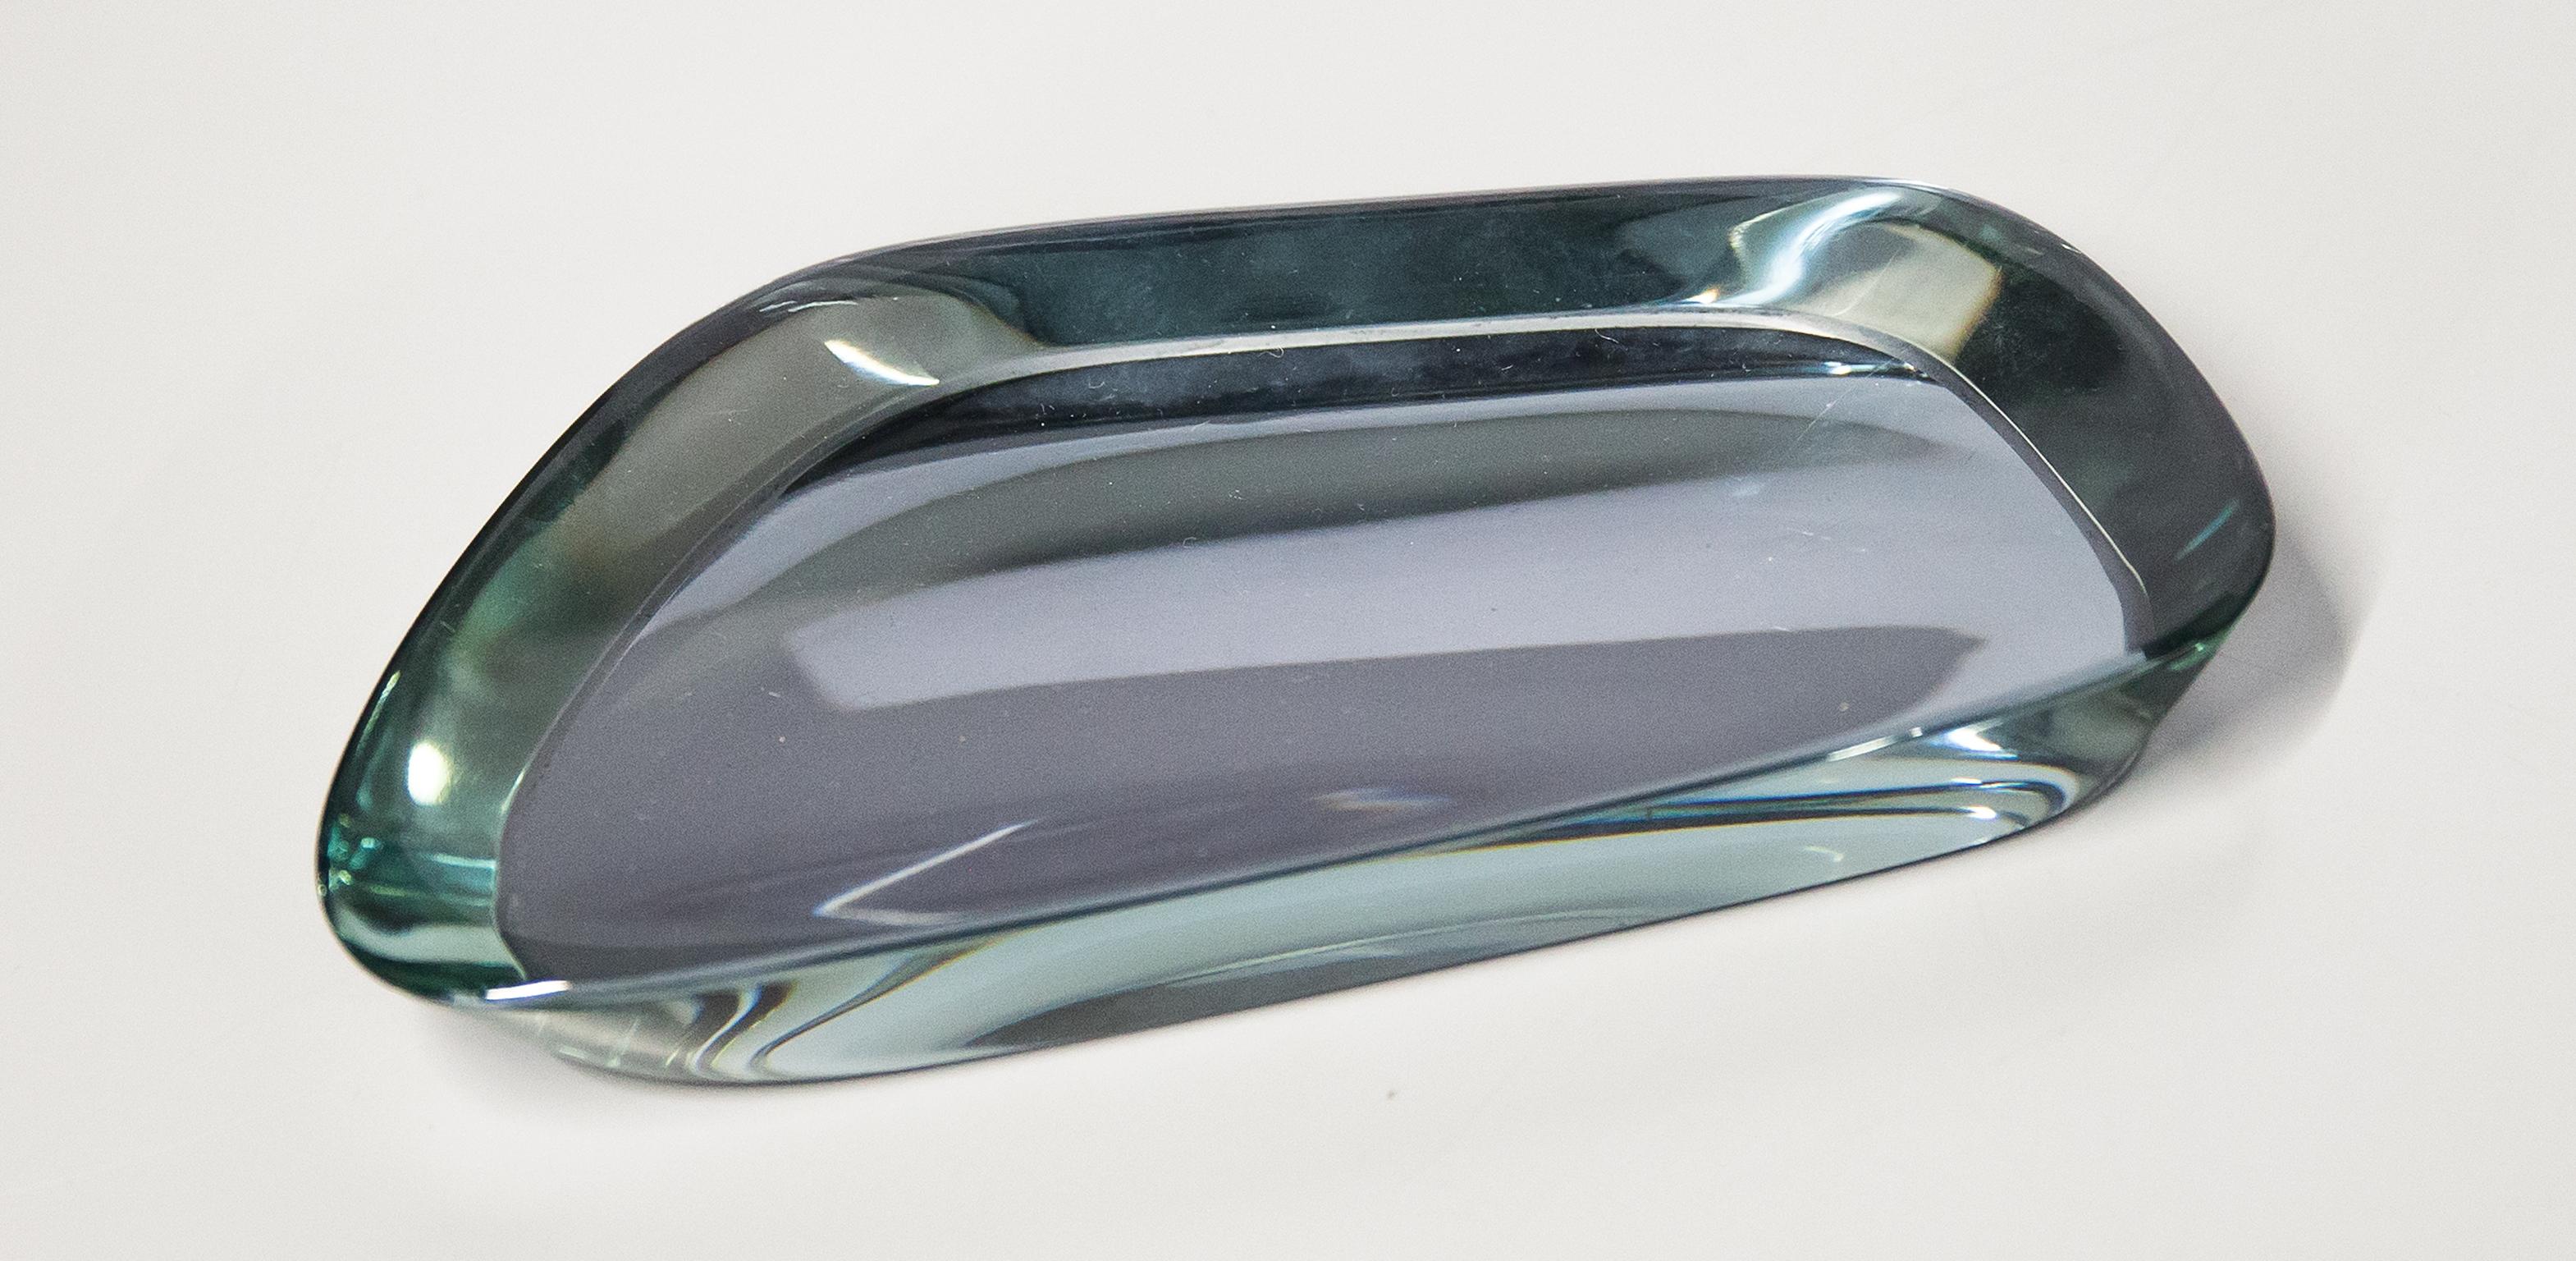 Rare blue grey glass bowl, candy dish designed by Max Ingrand for Fontana Arte, circa 1960. Similar examples pictured in Franco Deboni’s “Fontana Arte” published by Allemandi & C., 2012. Collectable crystal bowl by Italian master designer Max